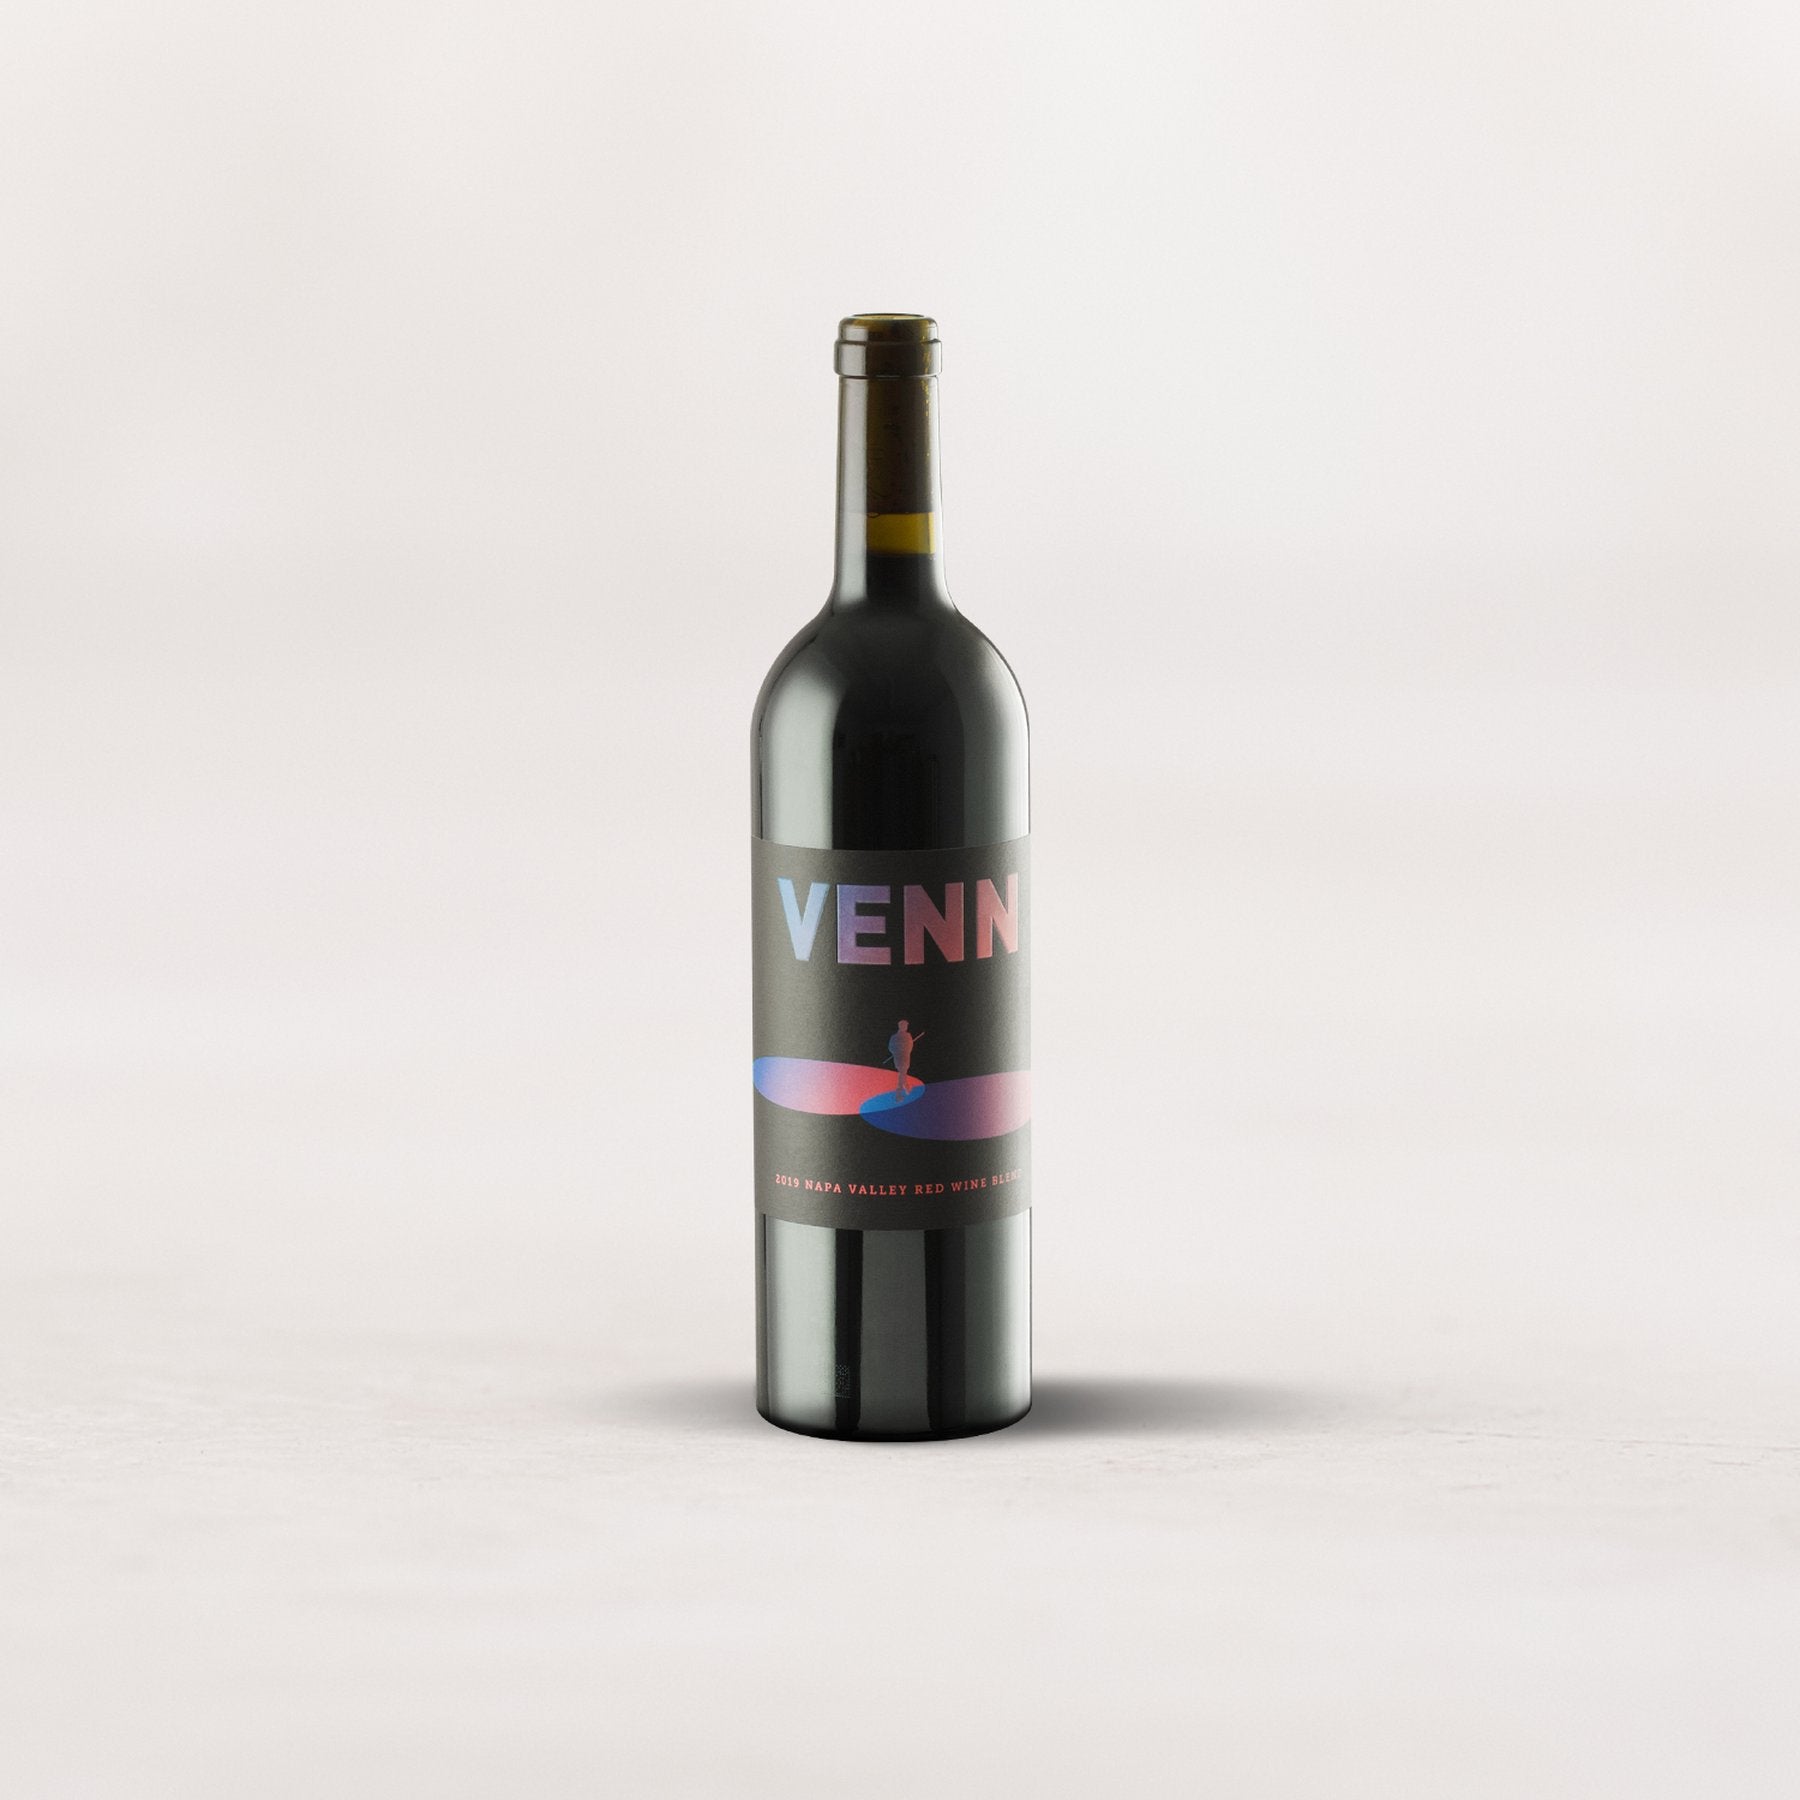 Young Inglewood, VENN, Napa Valley Red Blend